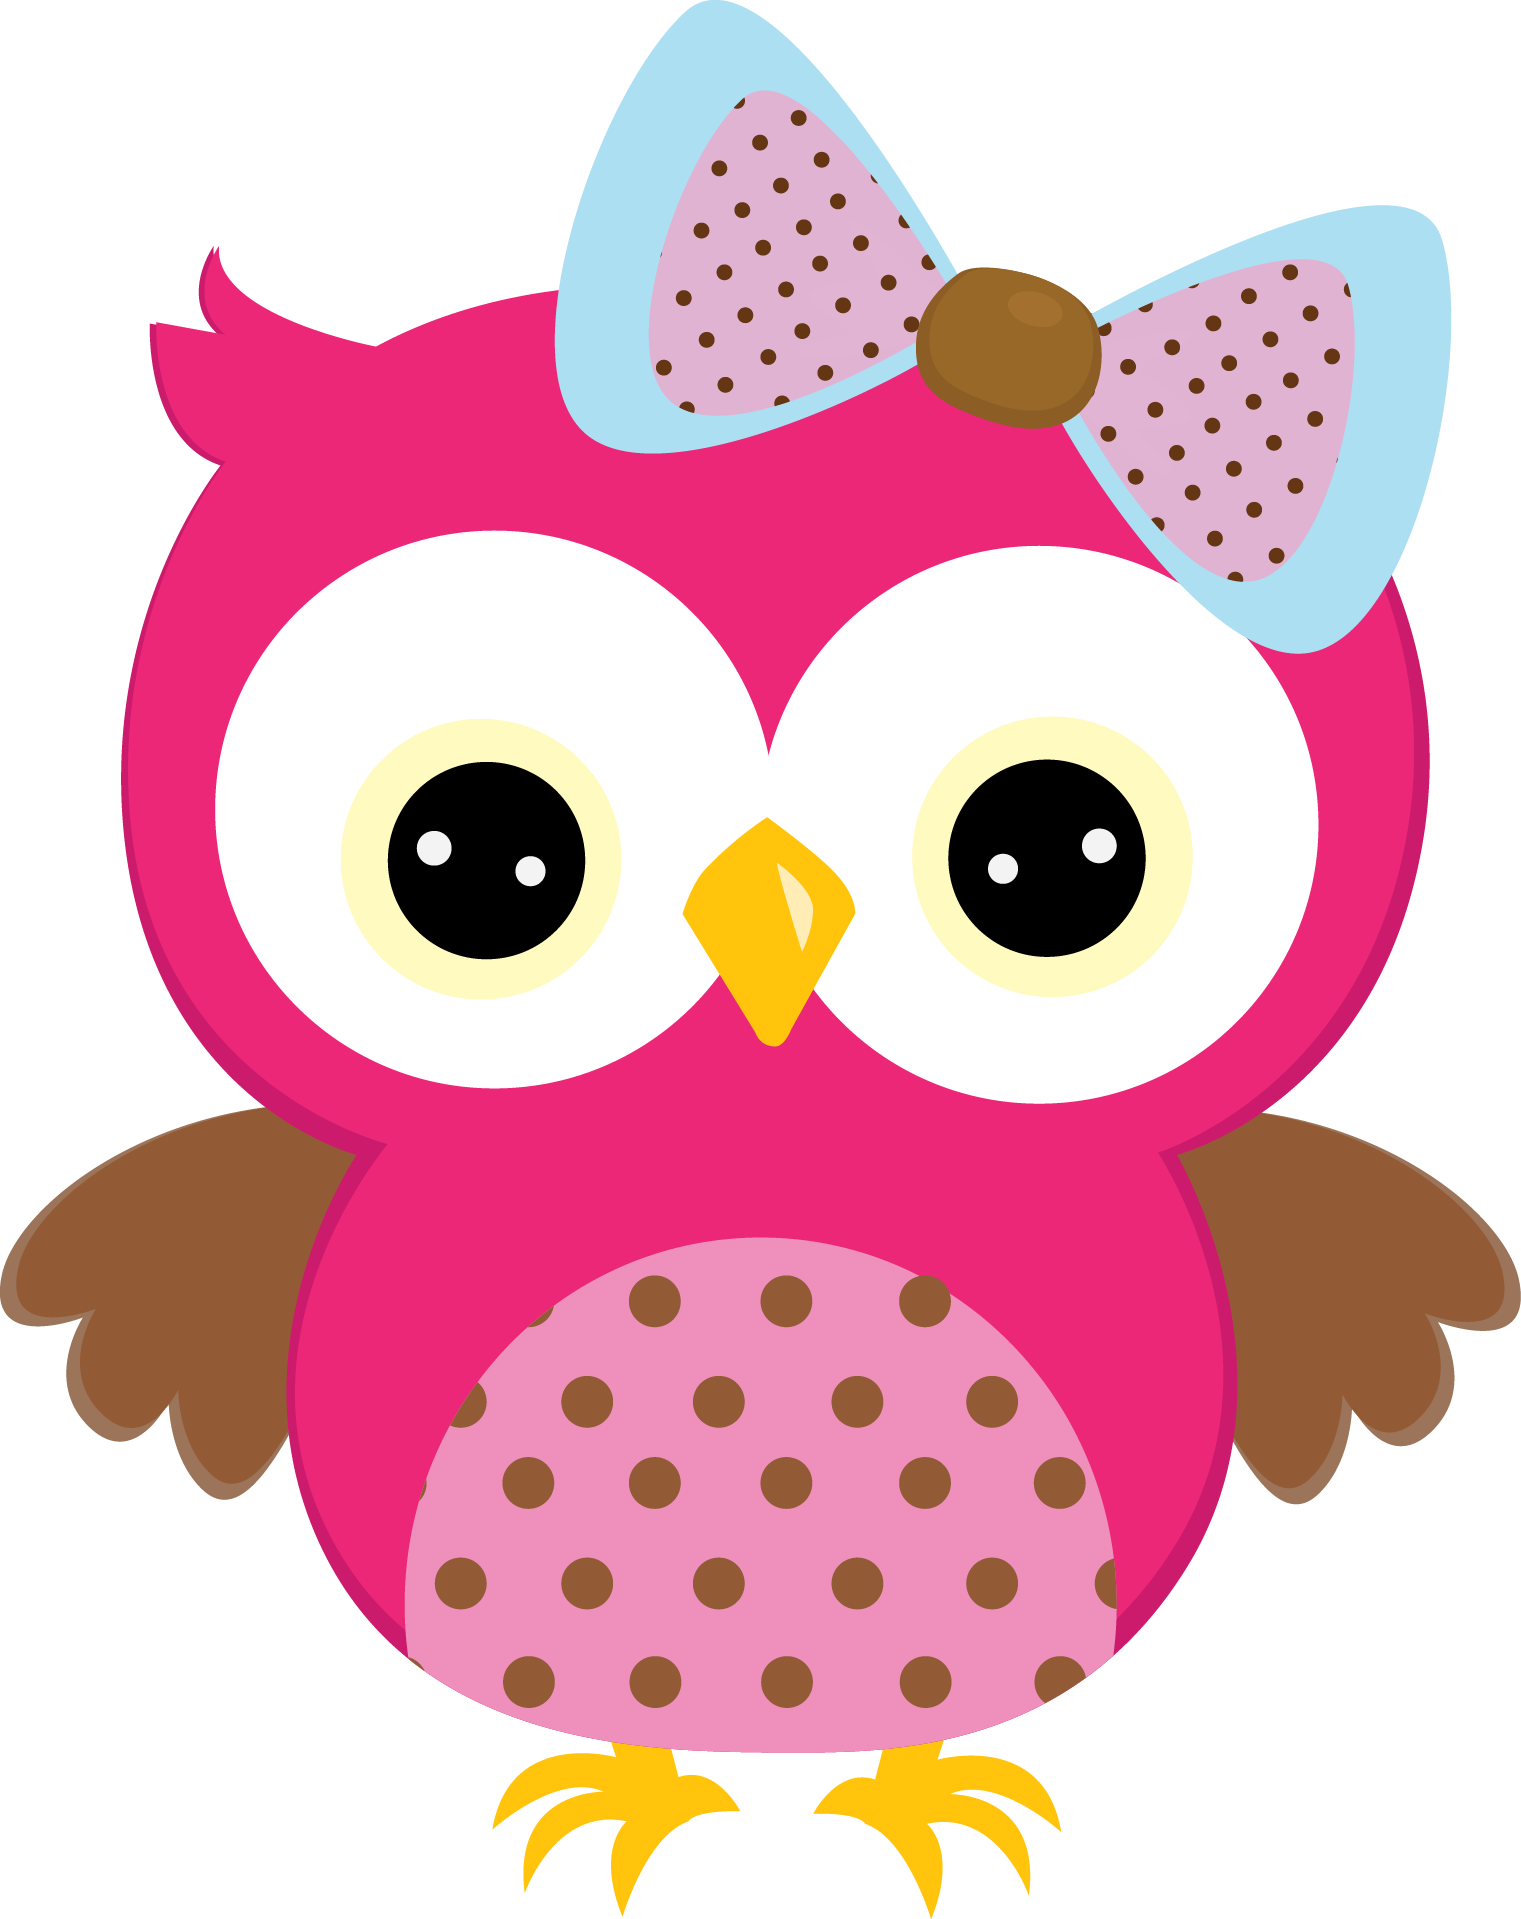 Words clipart pink. Owl png buscar con